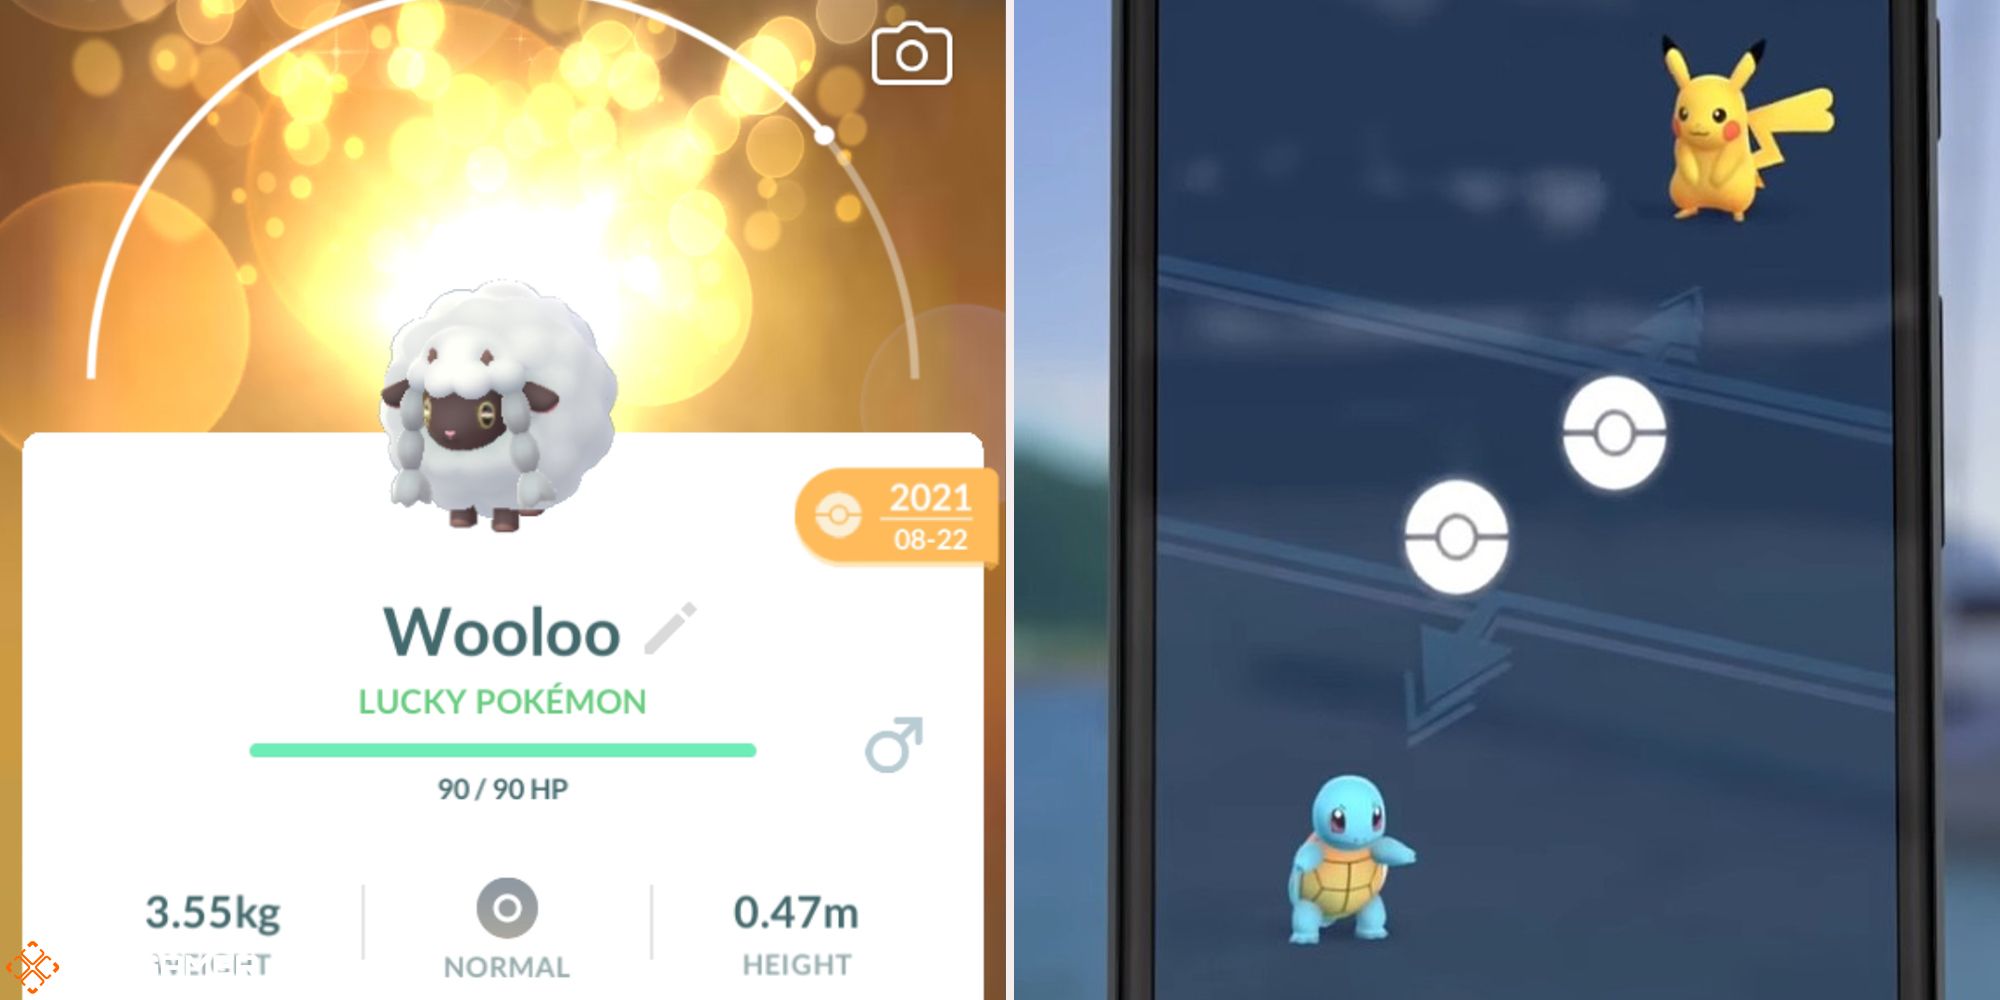 Pokemon Go - lucky wooloo (left), trade occuring on a phone (right)